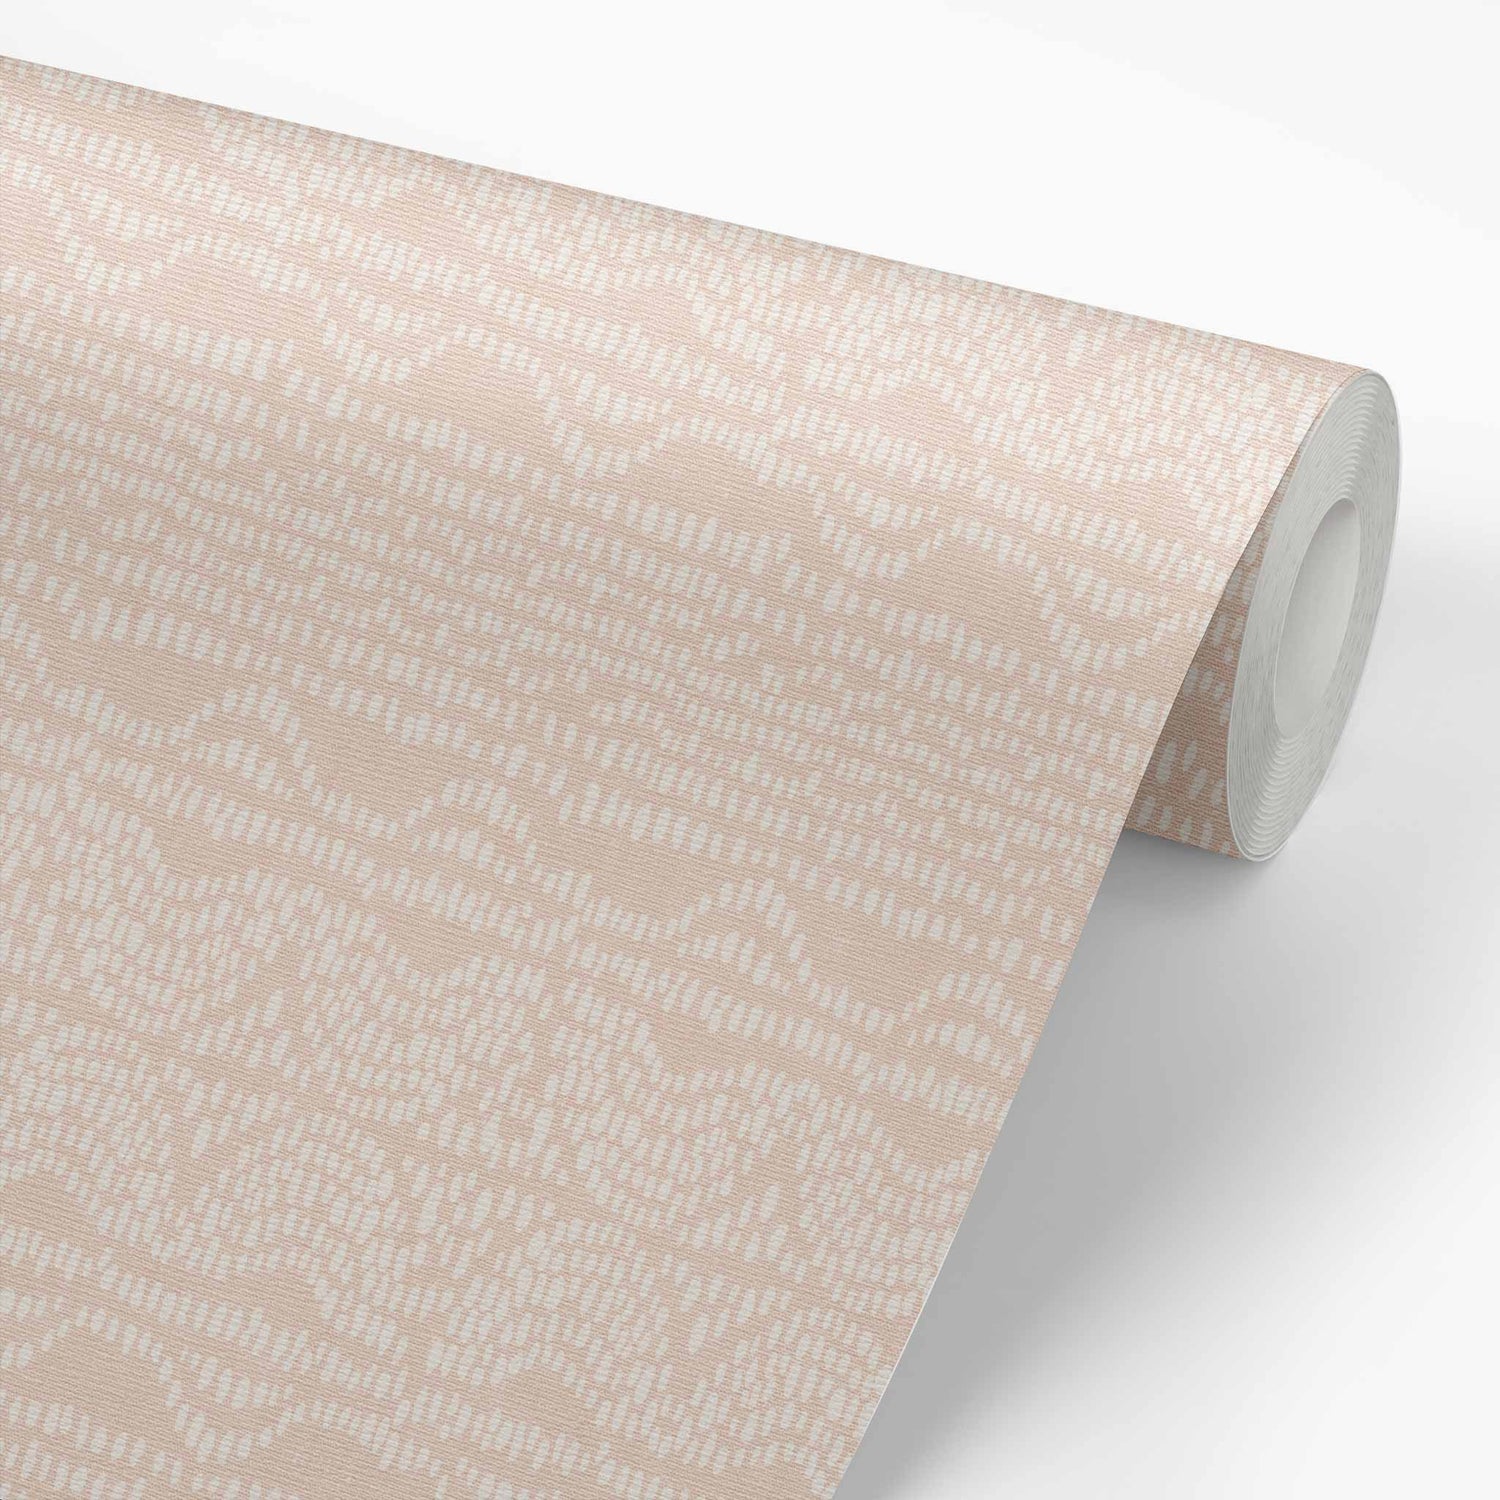 Drip with style with Pale Pink Dripping Dots Wallpaper! Its intricate, geometric design will add a touch of sophistication to any room, with no mess! Whether you're using it to spruce up a bathroom or office, Dripping Dots is the perfect way to give any space a modern makeover. 